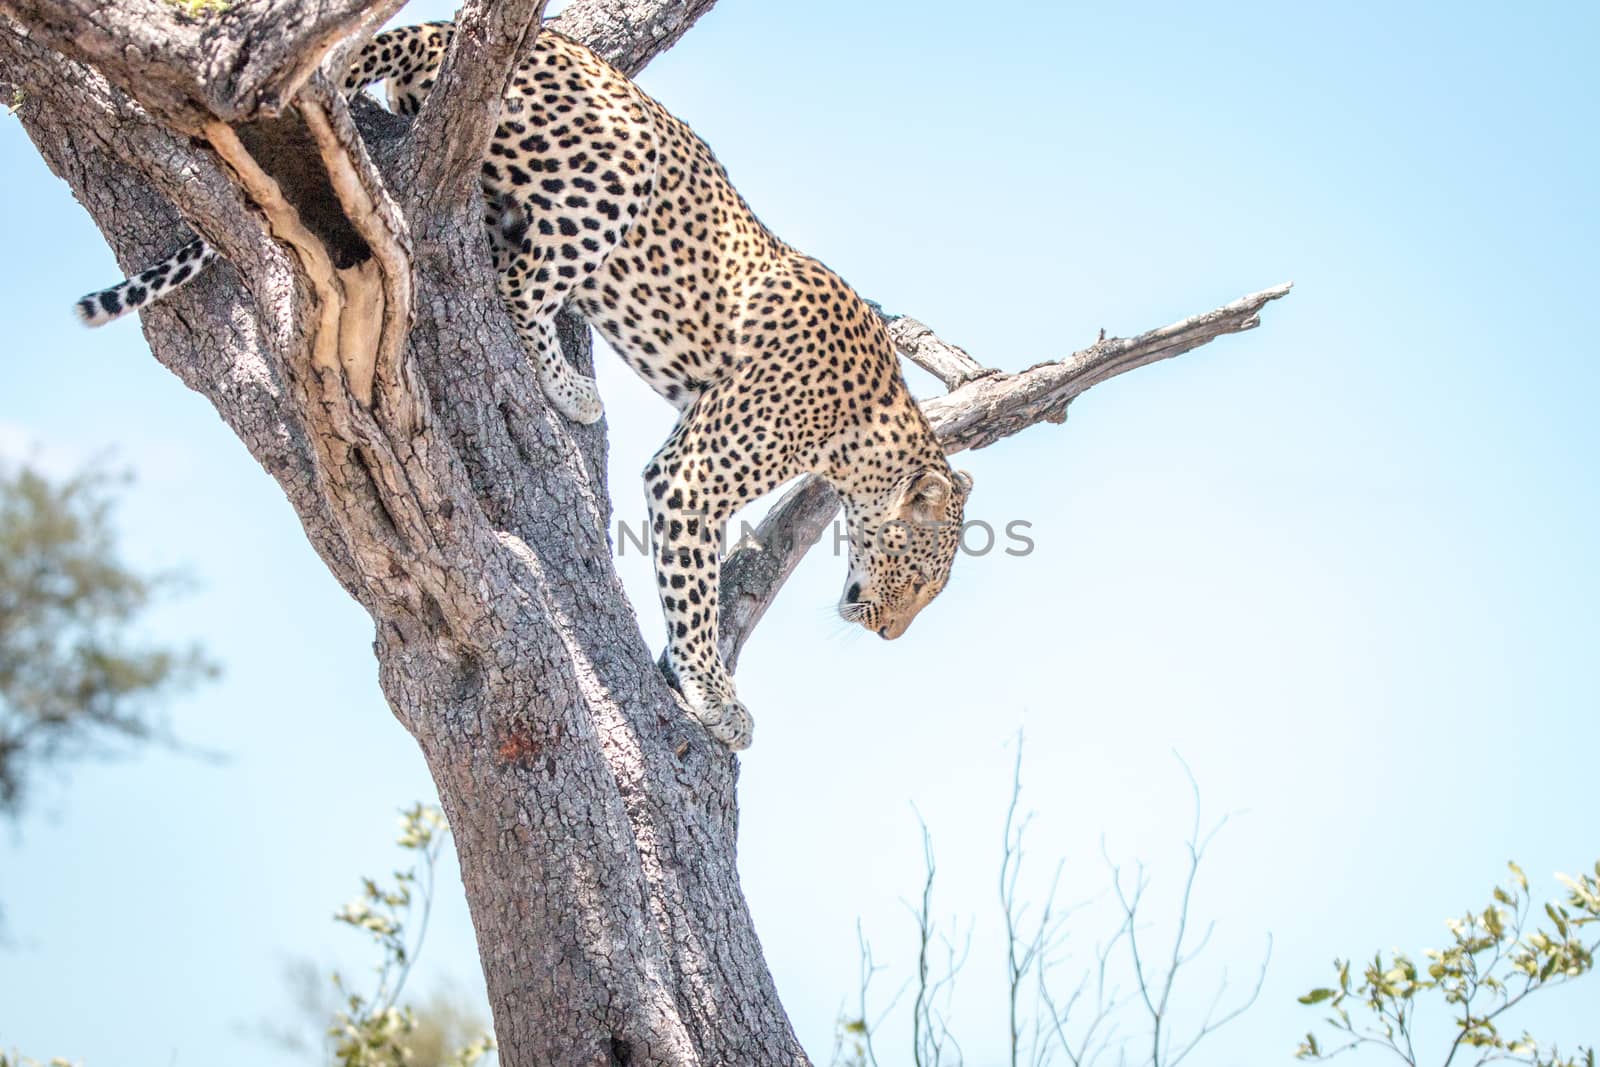 Leopard in a tree in the Kruger National Park, South Africa.